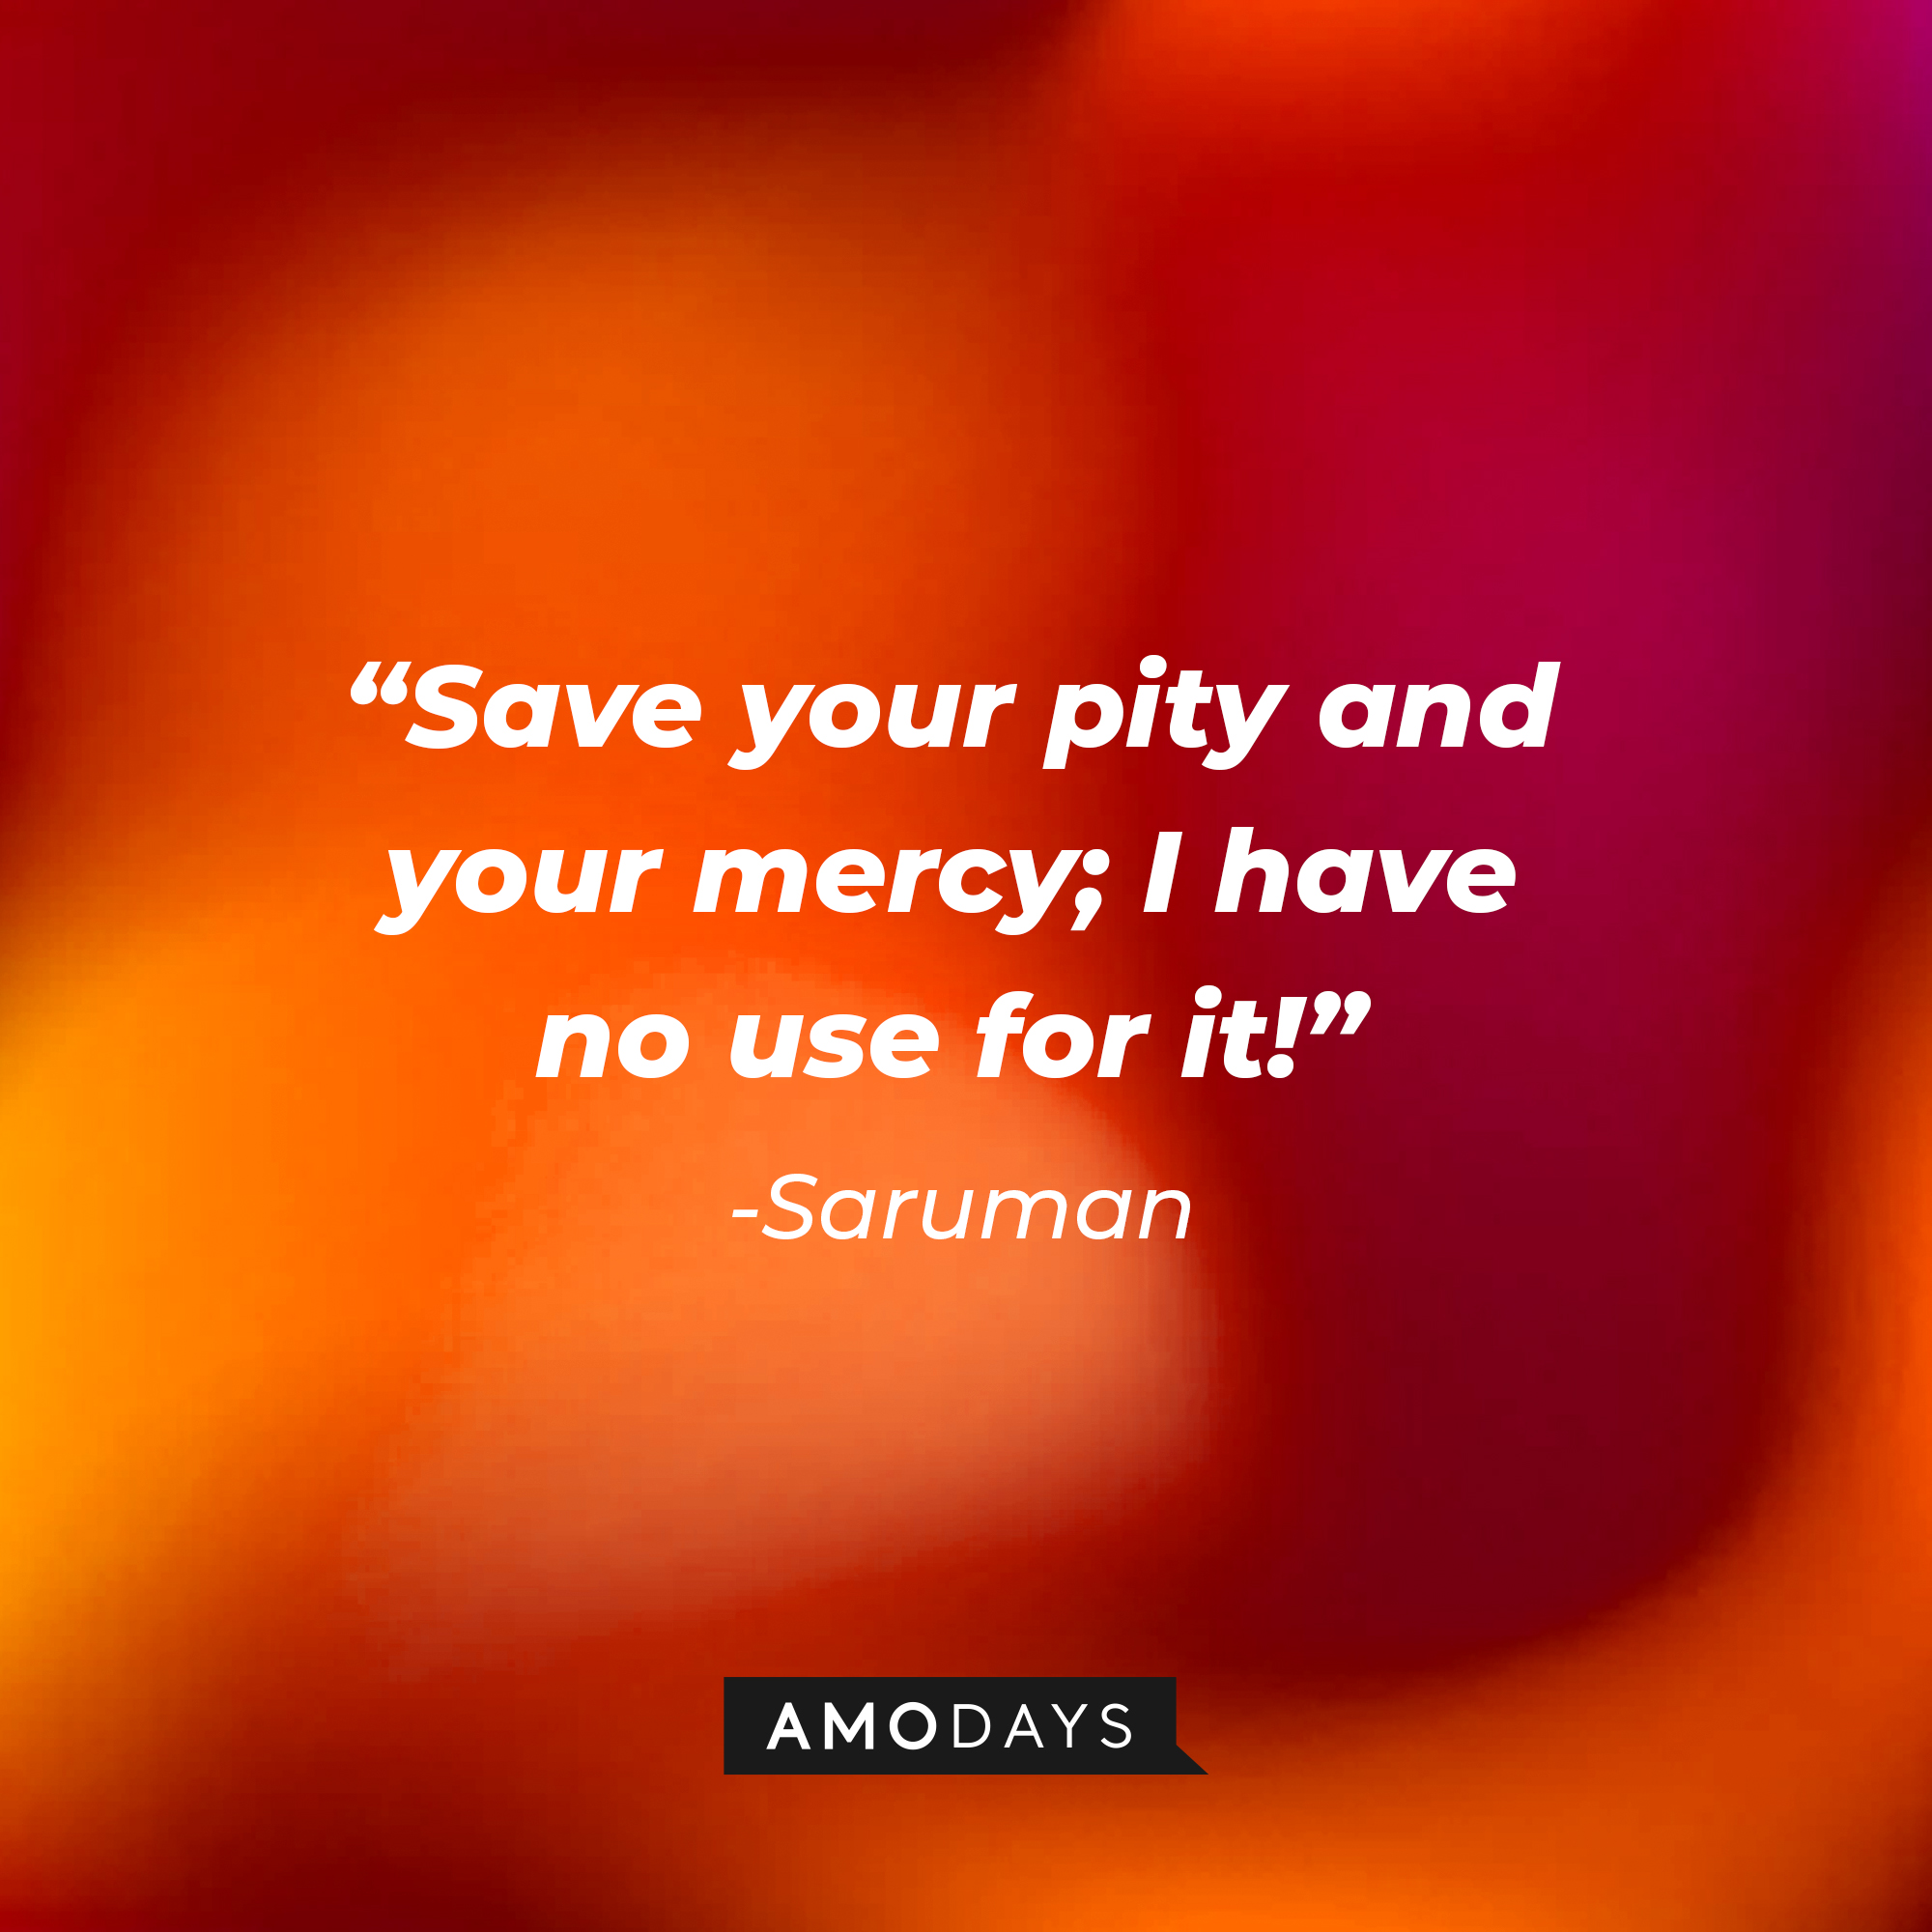 Saruman's quote: “Save your pity and your mercy; I have no use for it!” | Source: Amodays